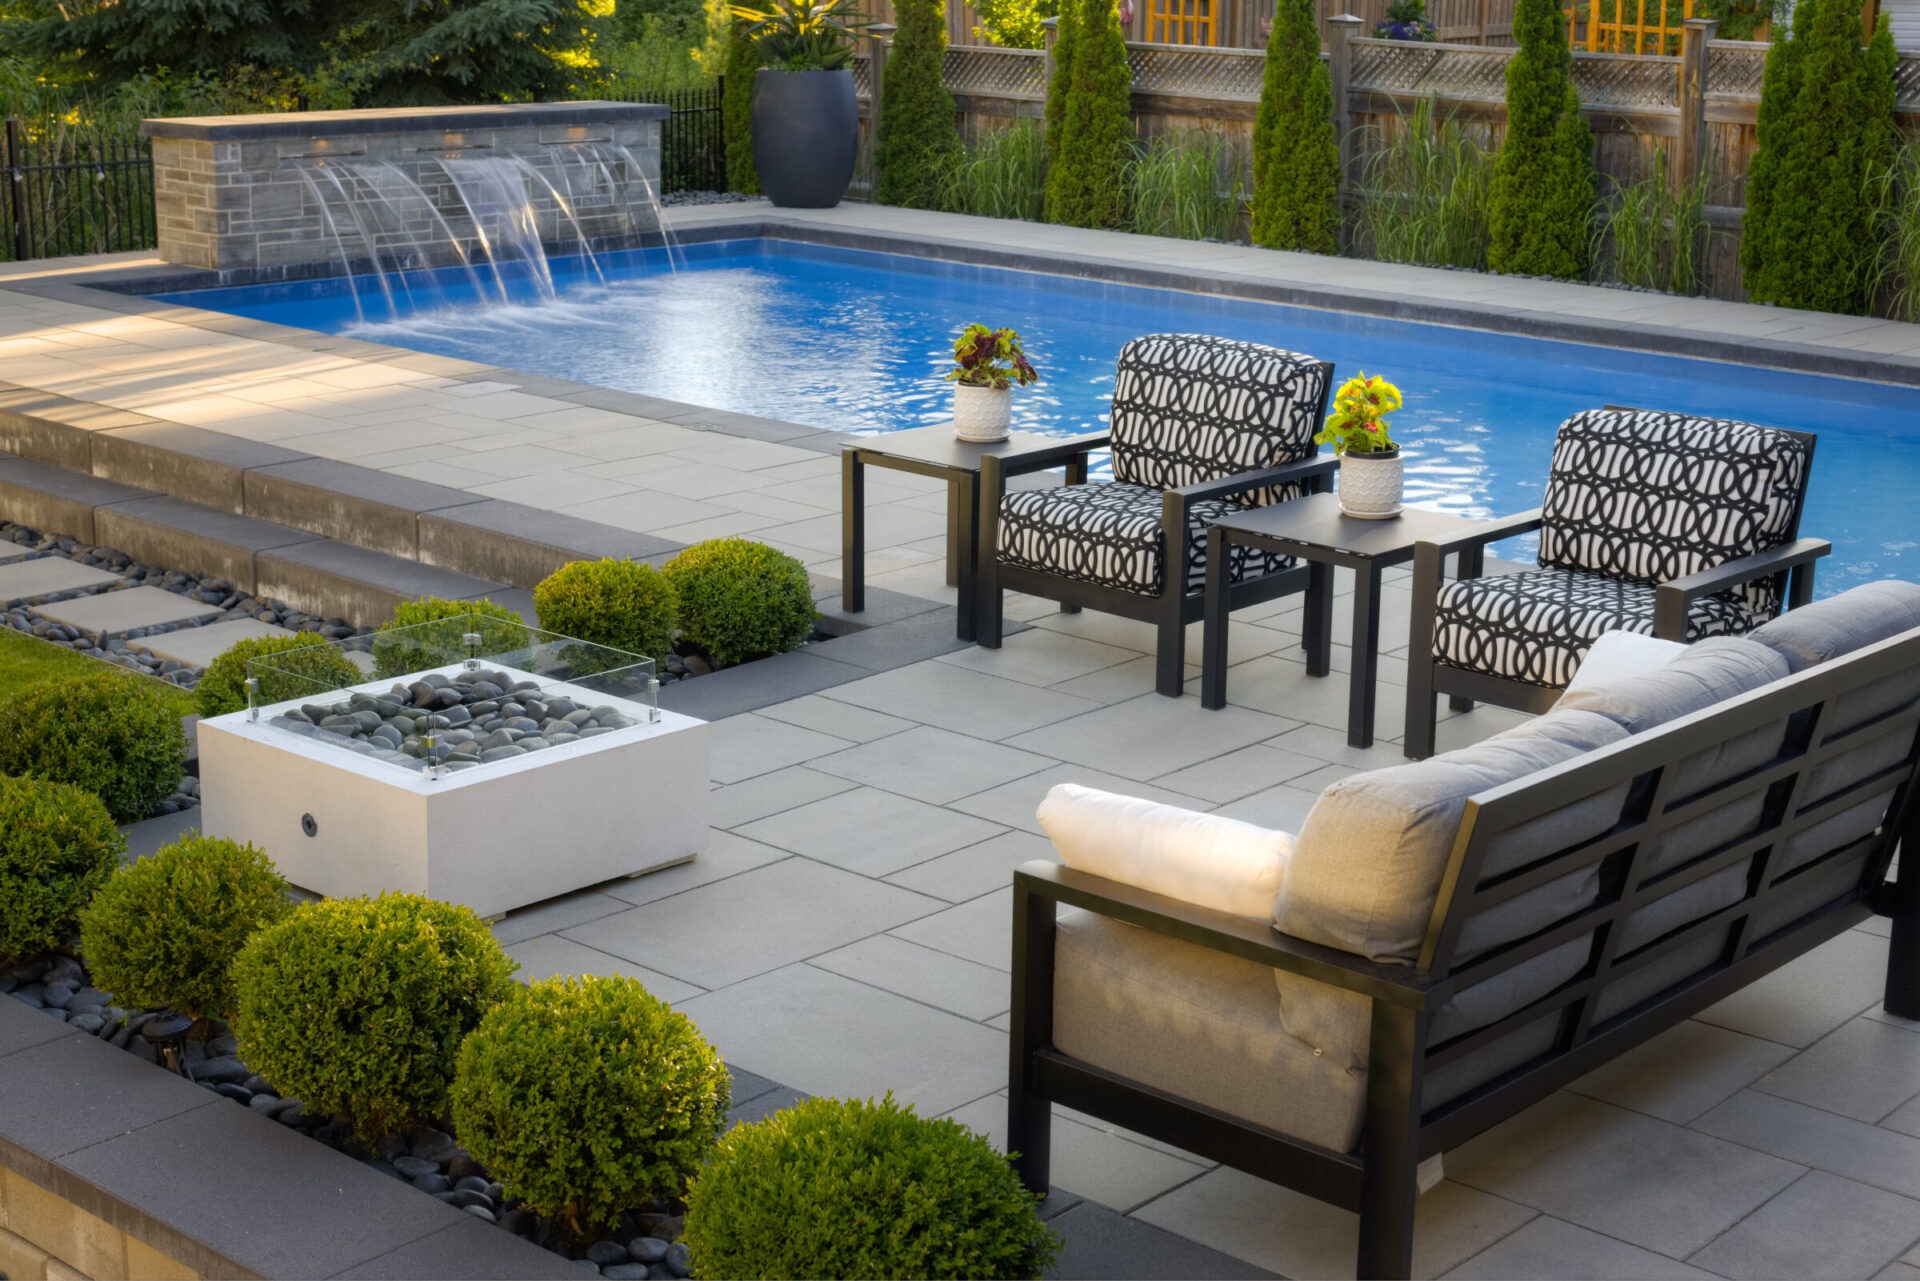 An elegant outdoor patio features patterned chairs, a modern fireplace, neatly trimmed shrubs, a swimming pool with fountains, and a tiled floor.